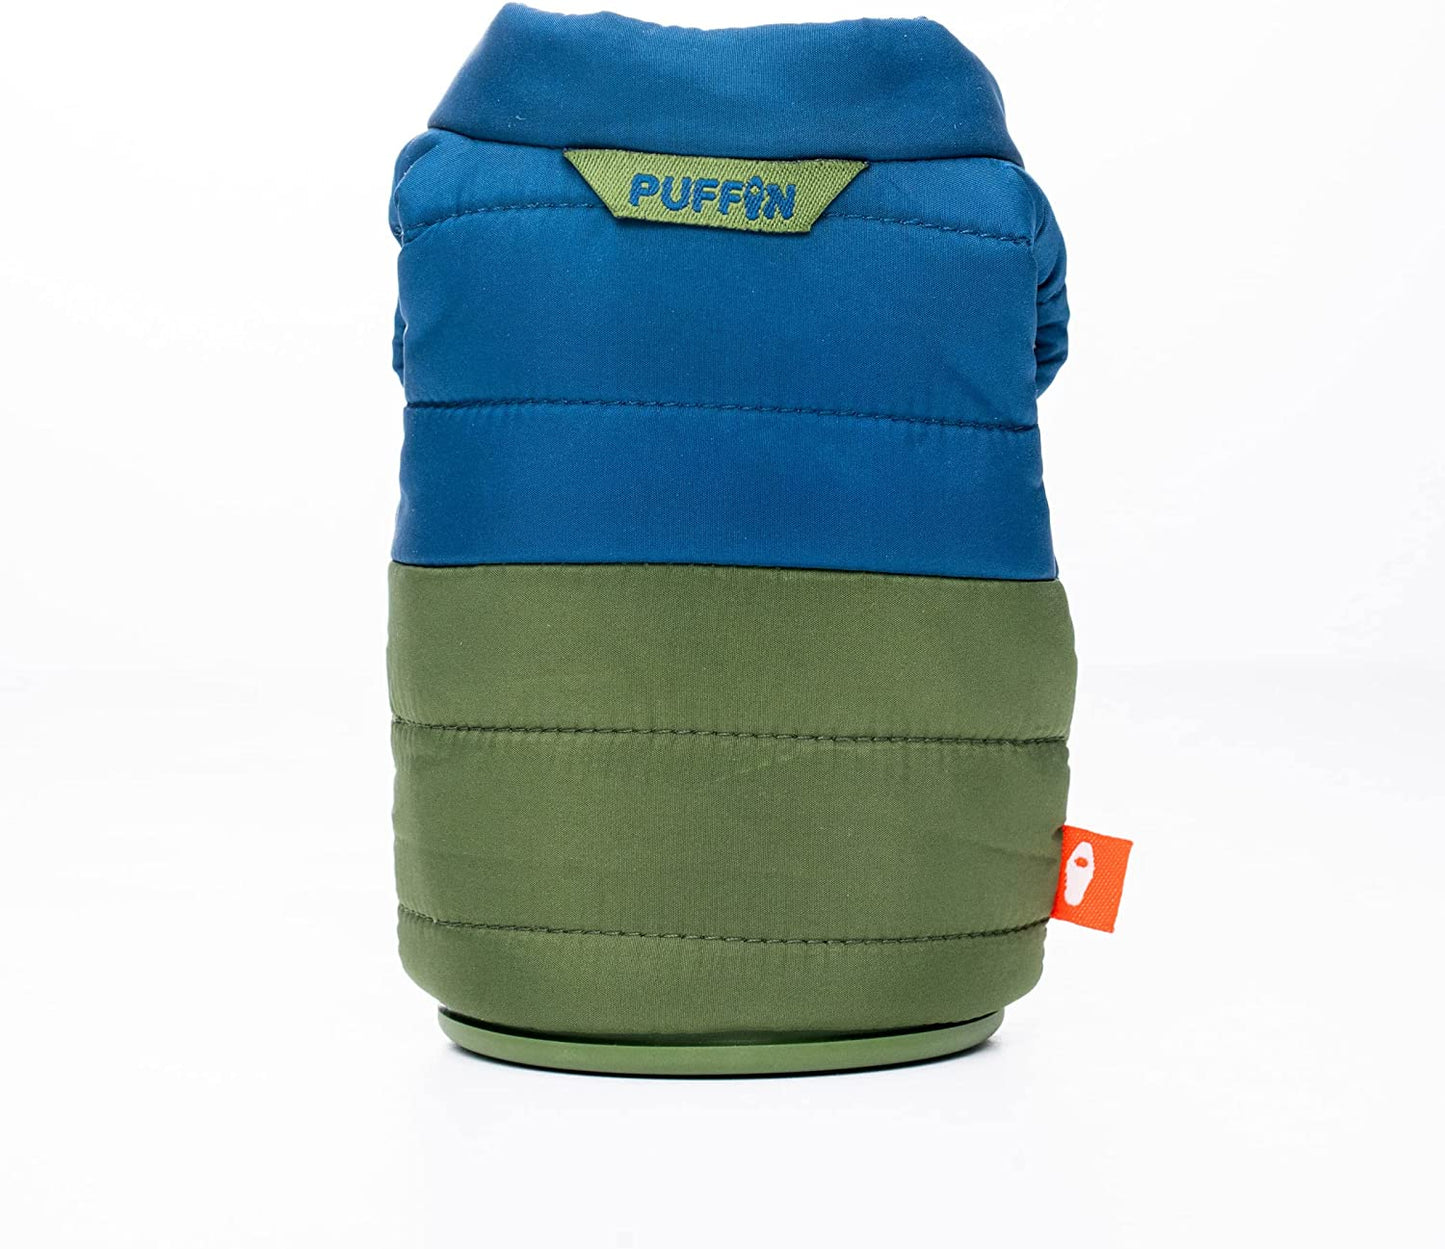 The Puffy Vest - Olive Green/Sailor Blue